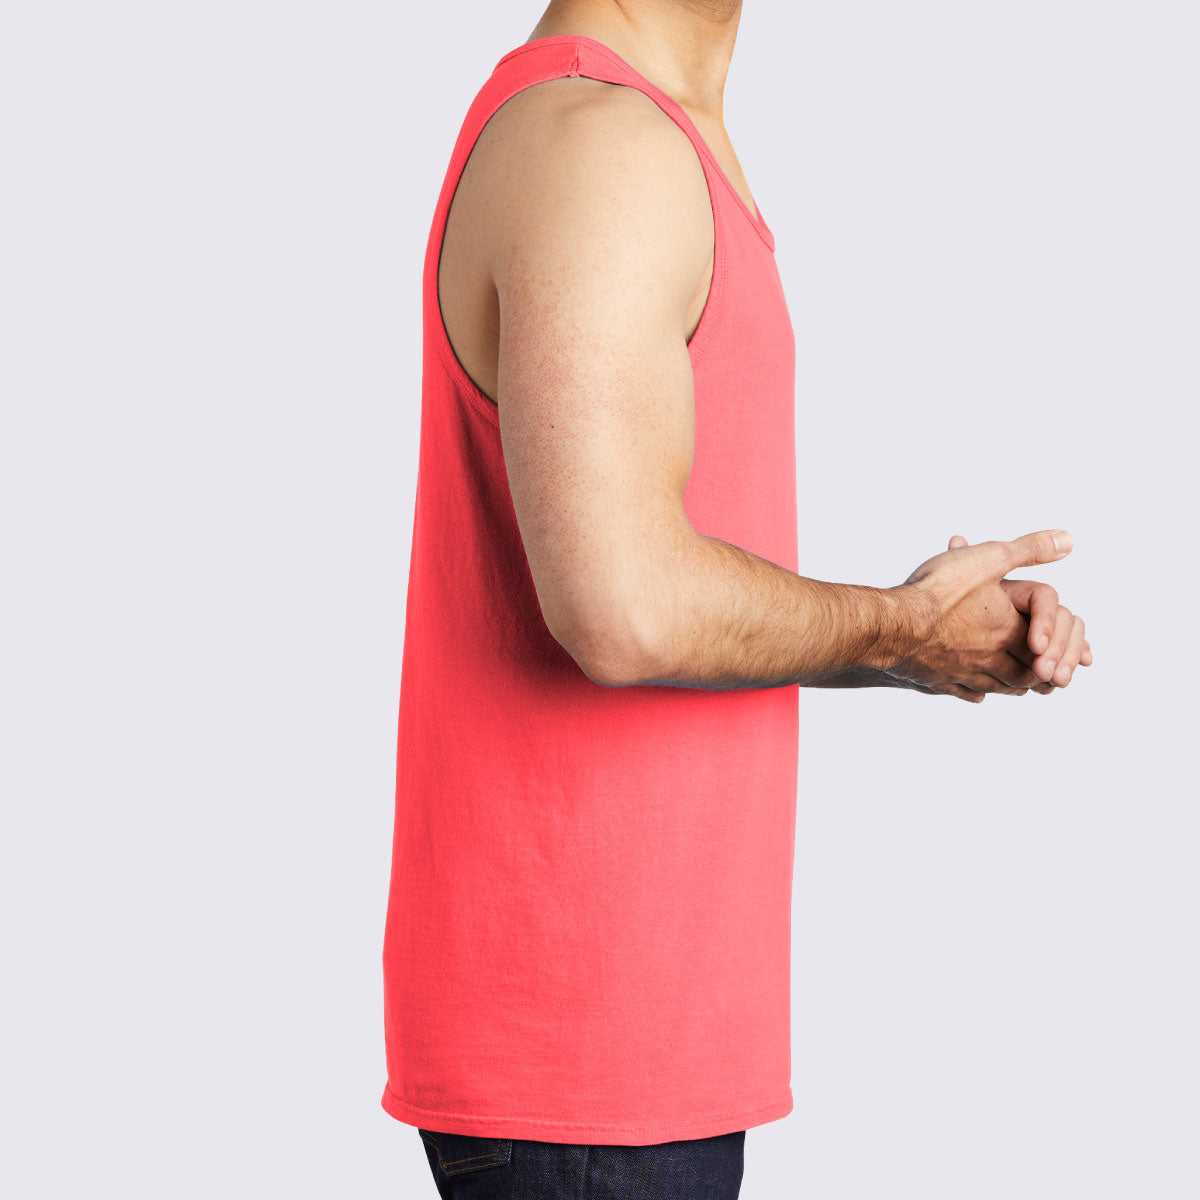 Therapy Beach Wash® Garment-Dyed Tank Top